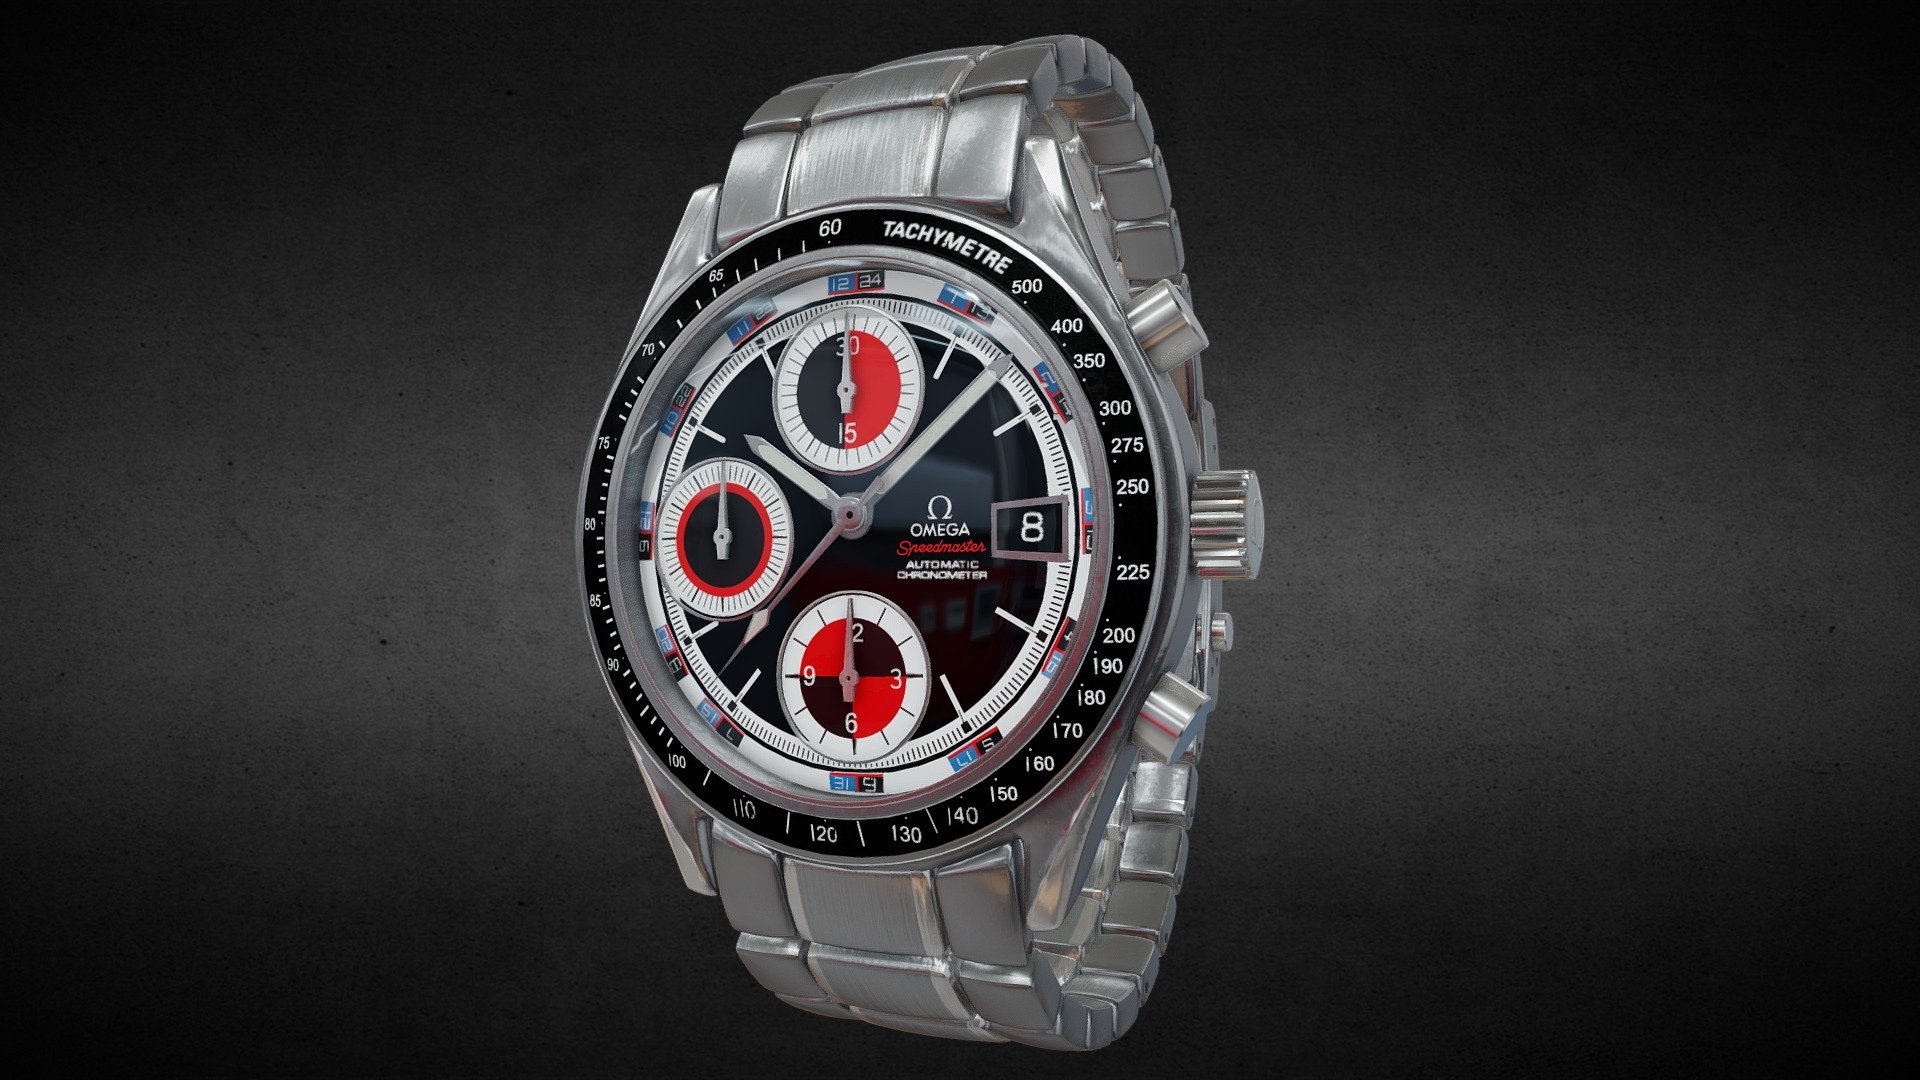 Awesome stainless steel Omega Speedmaster 3210.52.00 Watch․
Use for Unreal Engine 4 and Unity3D. Try in augmented reality in the AR-Watches app. 
Links to the app: Android, iOS

Currently available for download in FBX format.

3D model developed by AR-Watches

Disclaimer: We do not own the design of the watch, we only made the 3D model.l 3d model